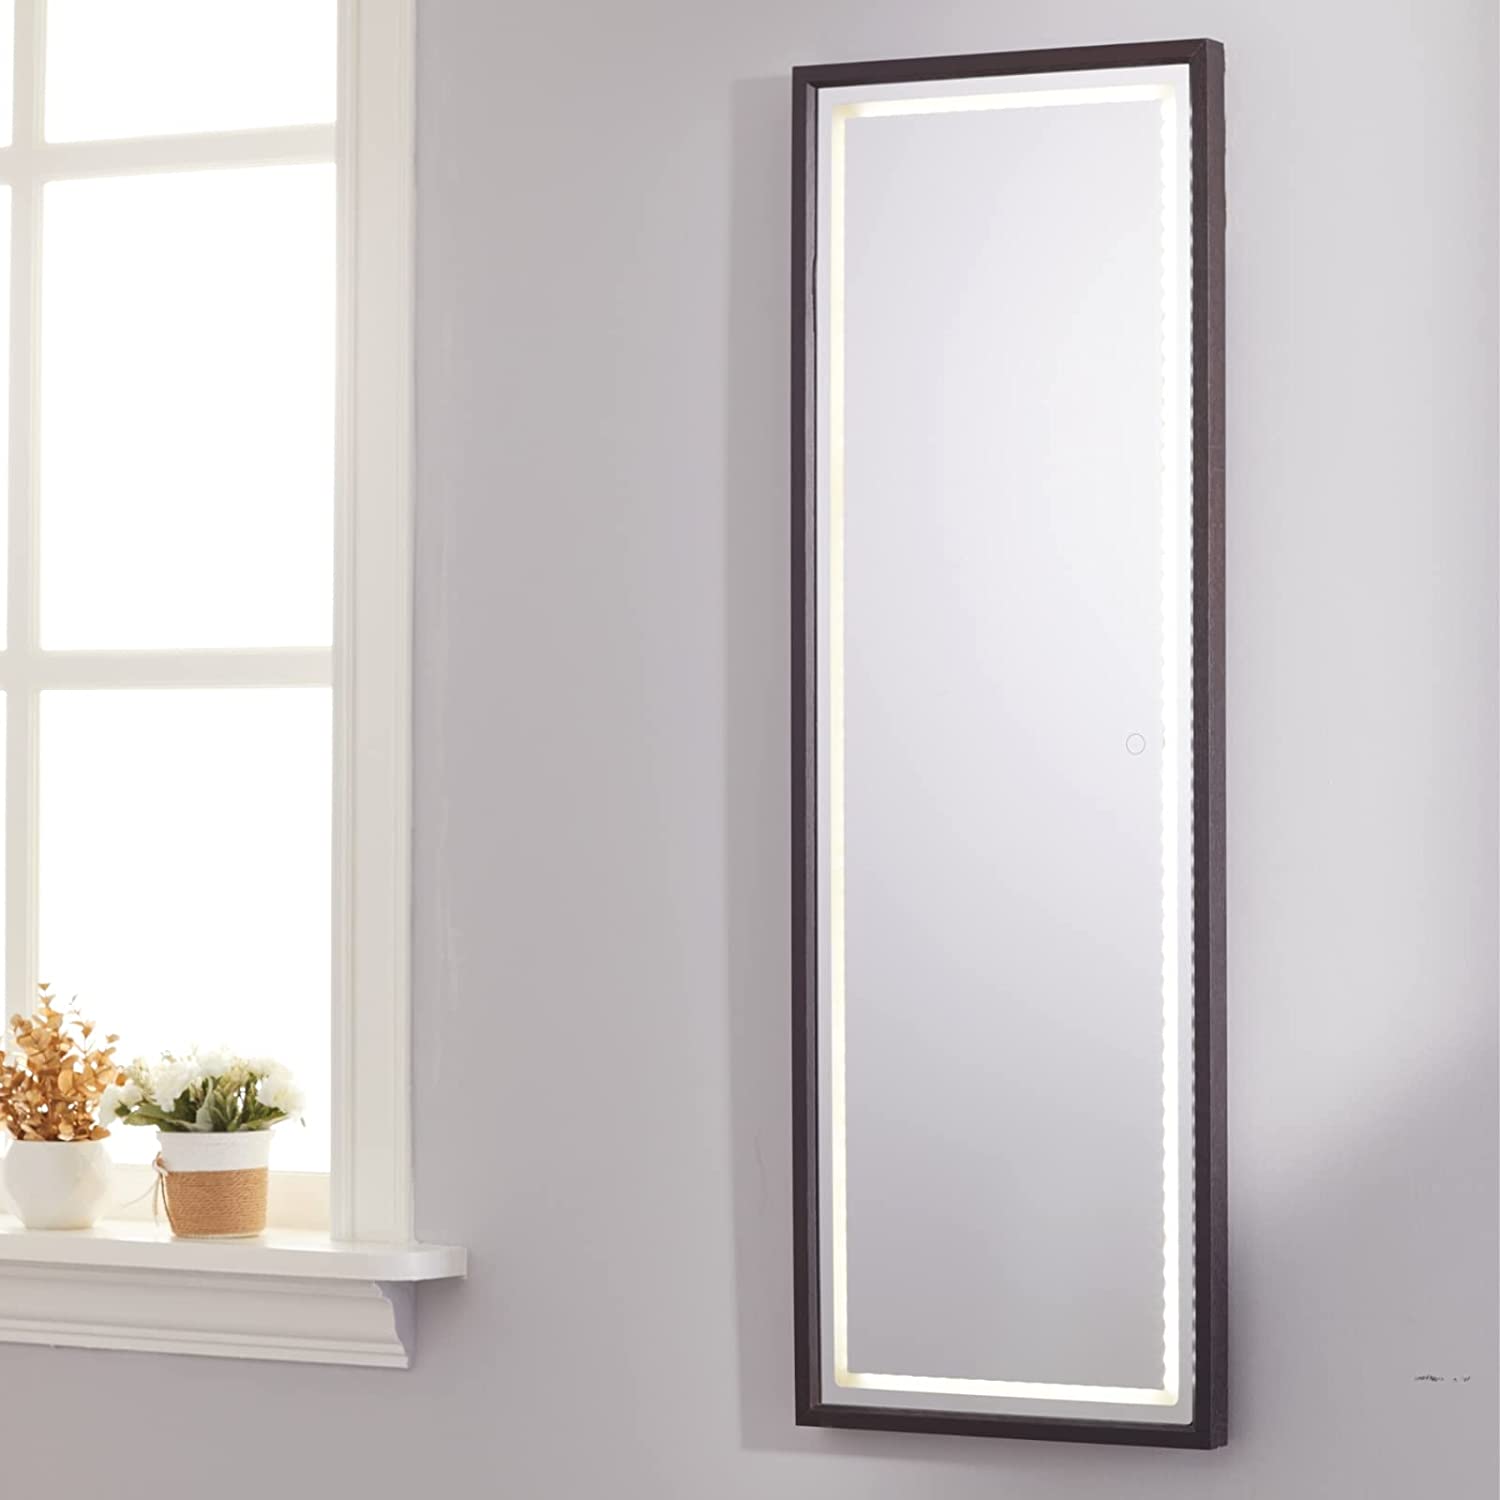 Luxfurni | Full-Length Mirror | LED Full-Length Mirror with Dimmable Lighting for Bedroom or Dressing Room Brown